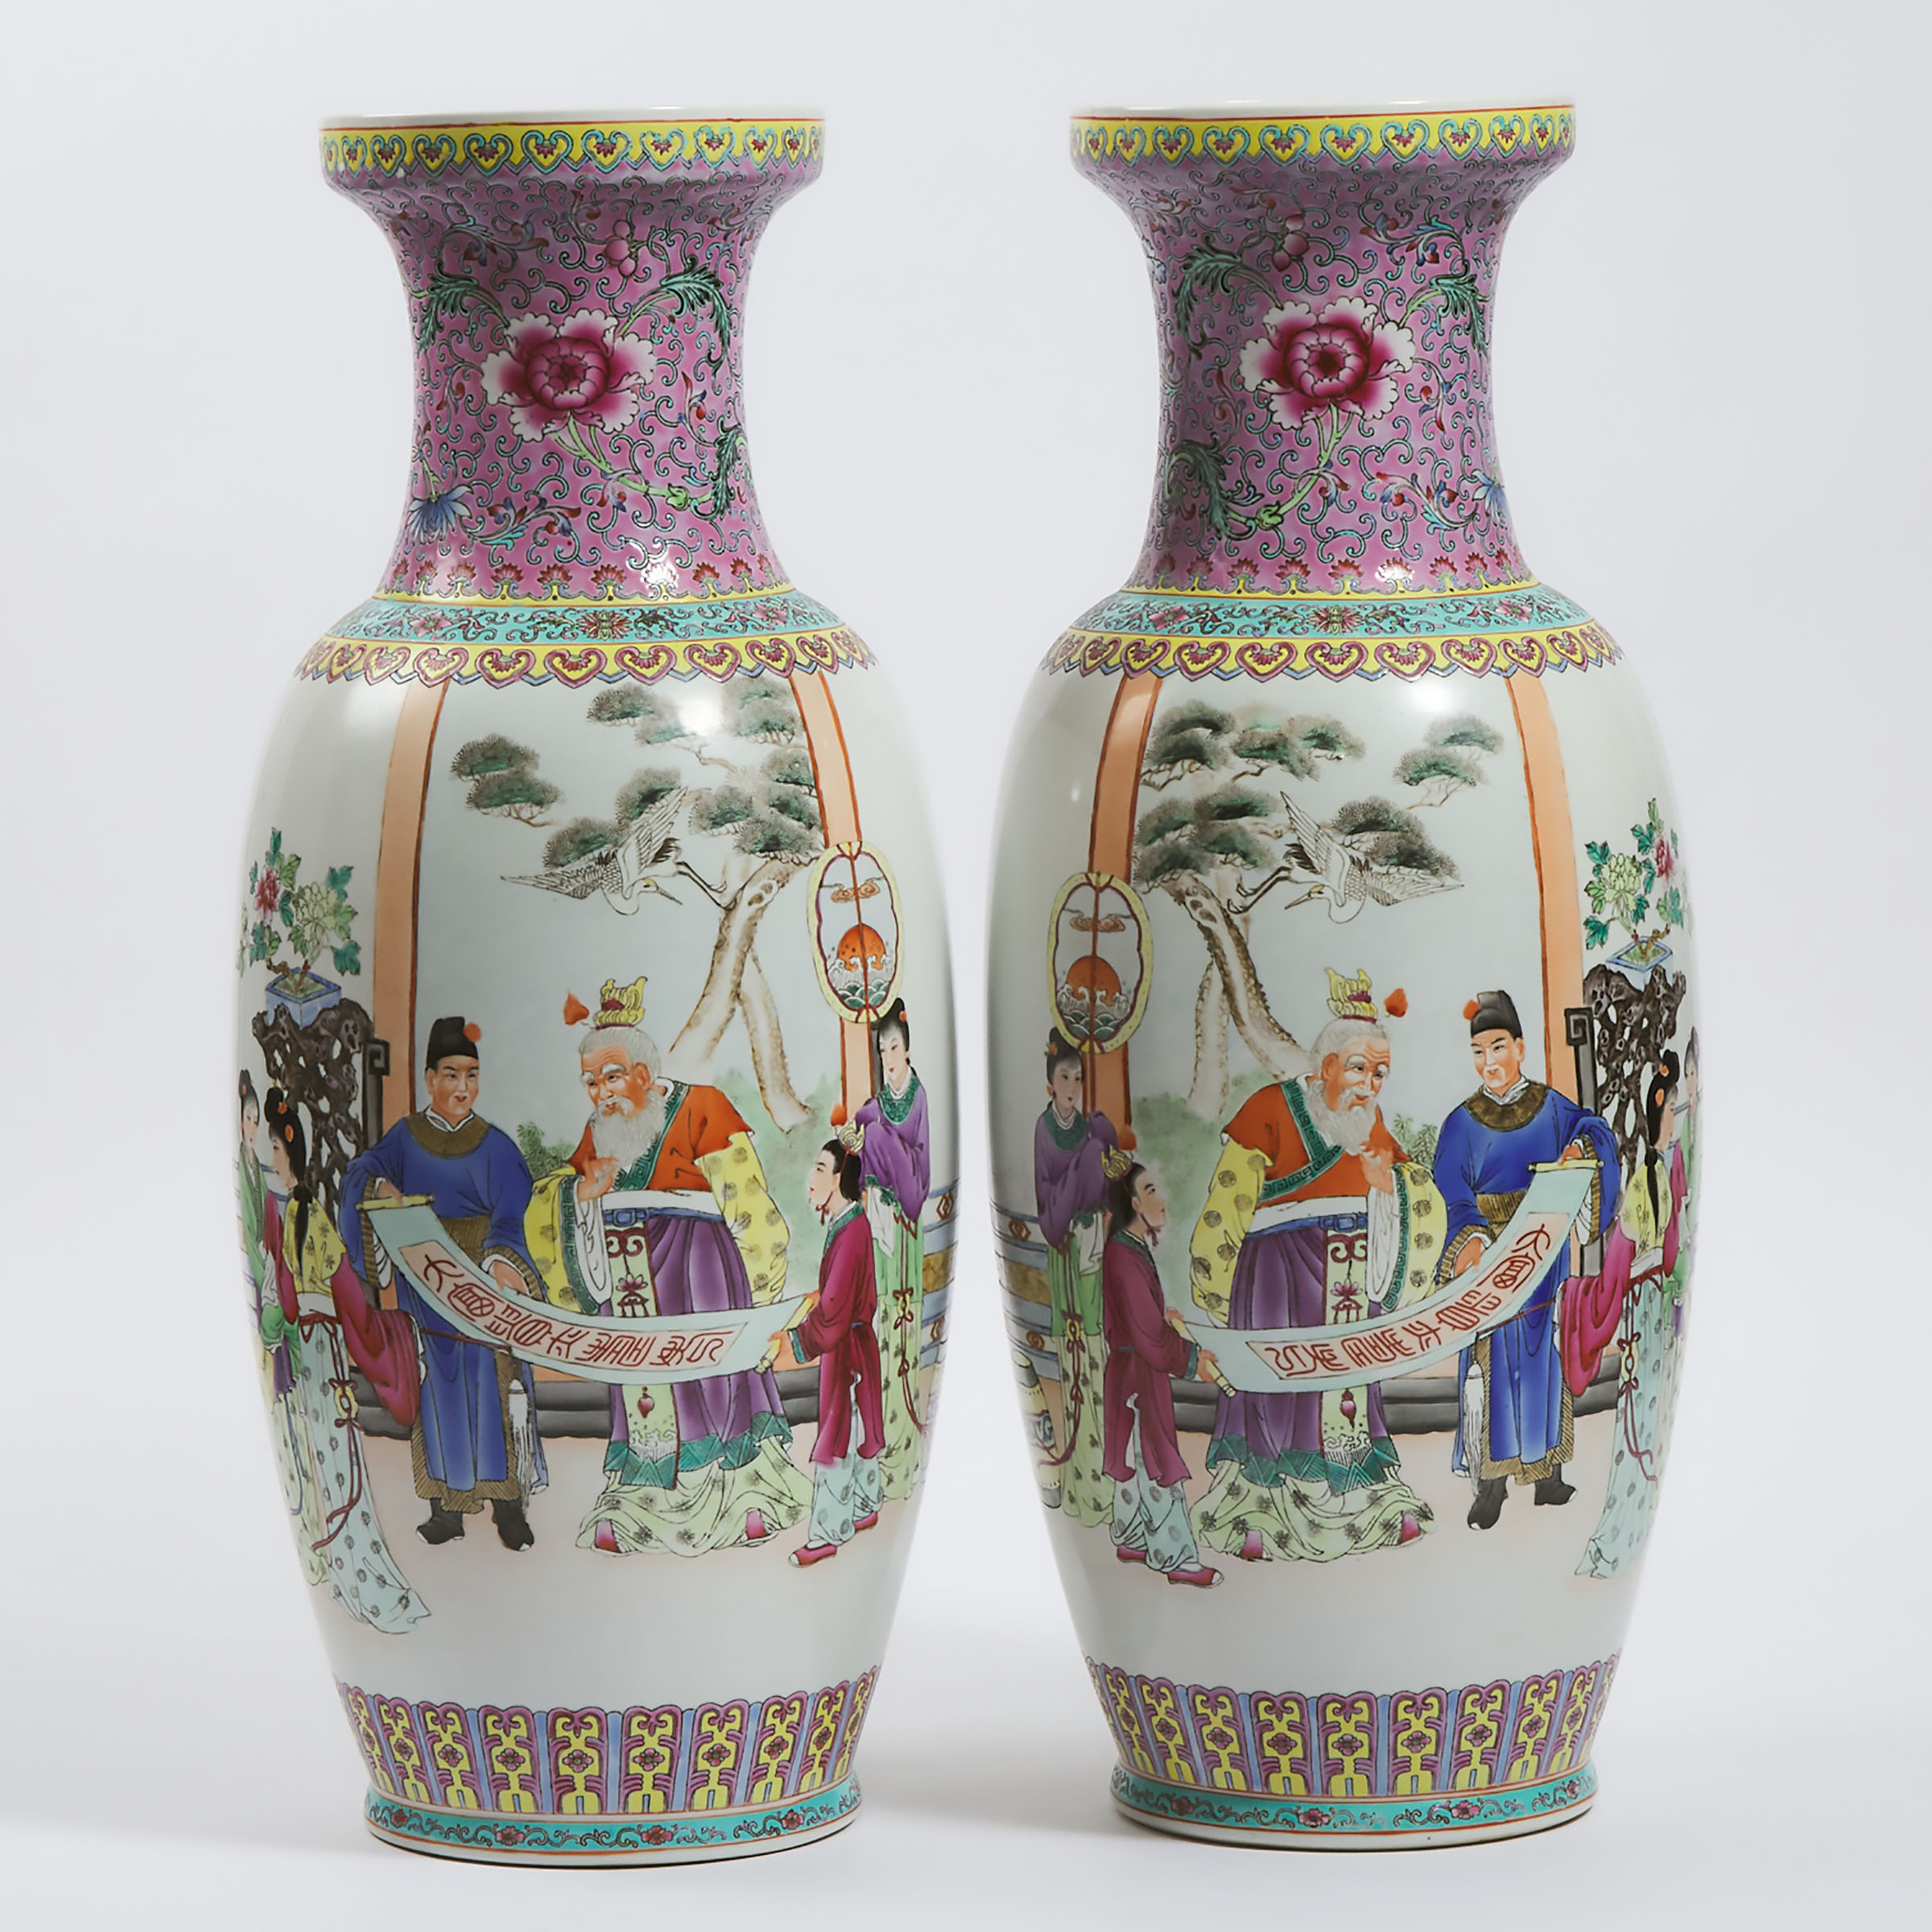 A Pair of Large Chinese Famille Rose 'Figural' Vases, Mid-20th Century